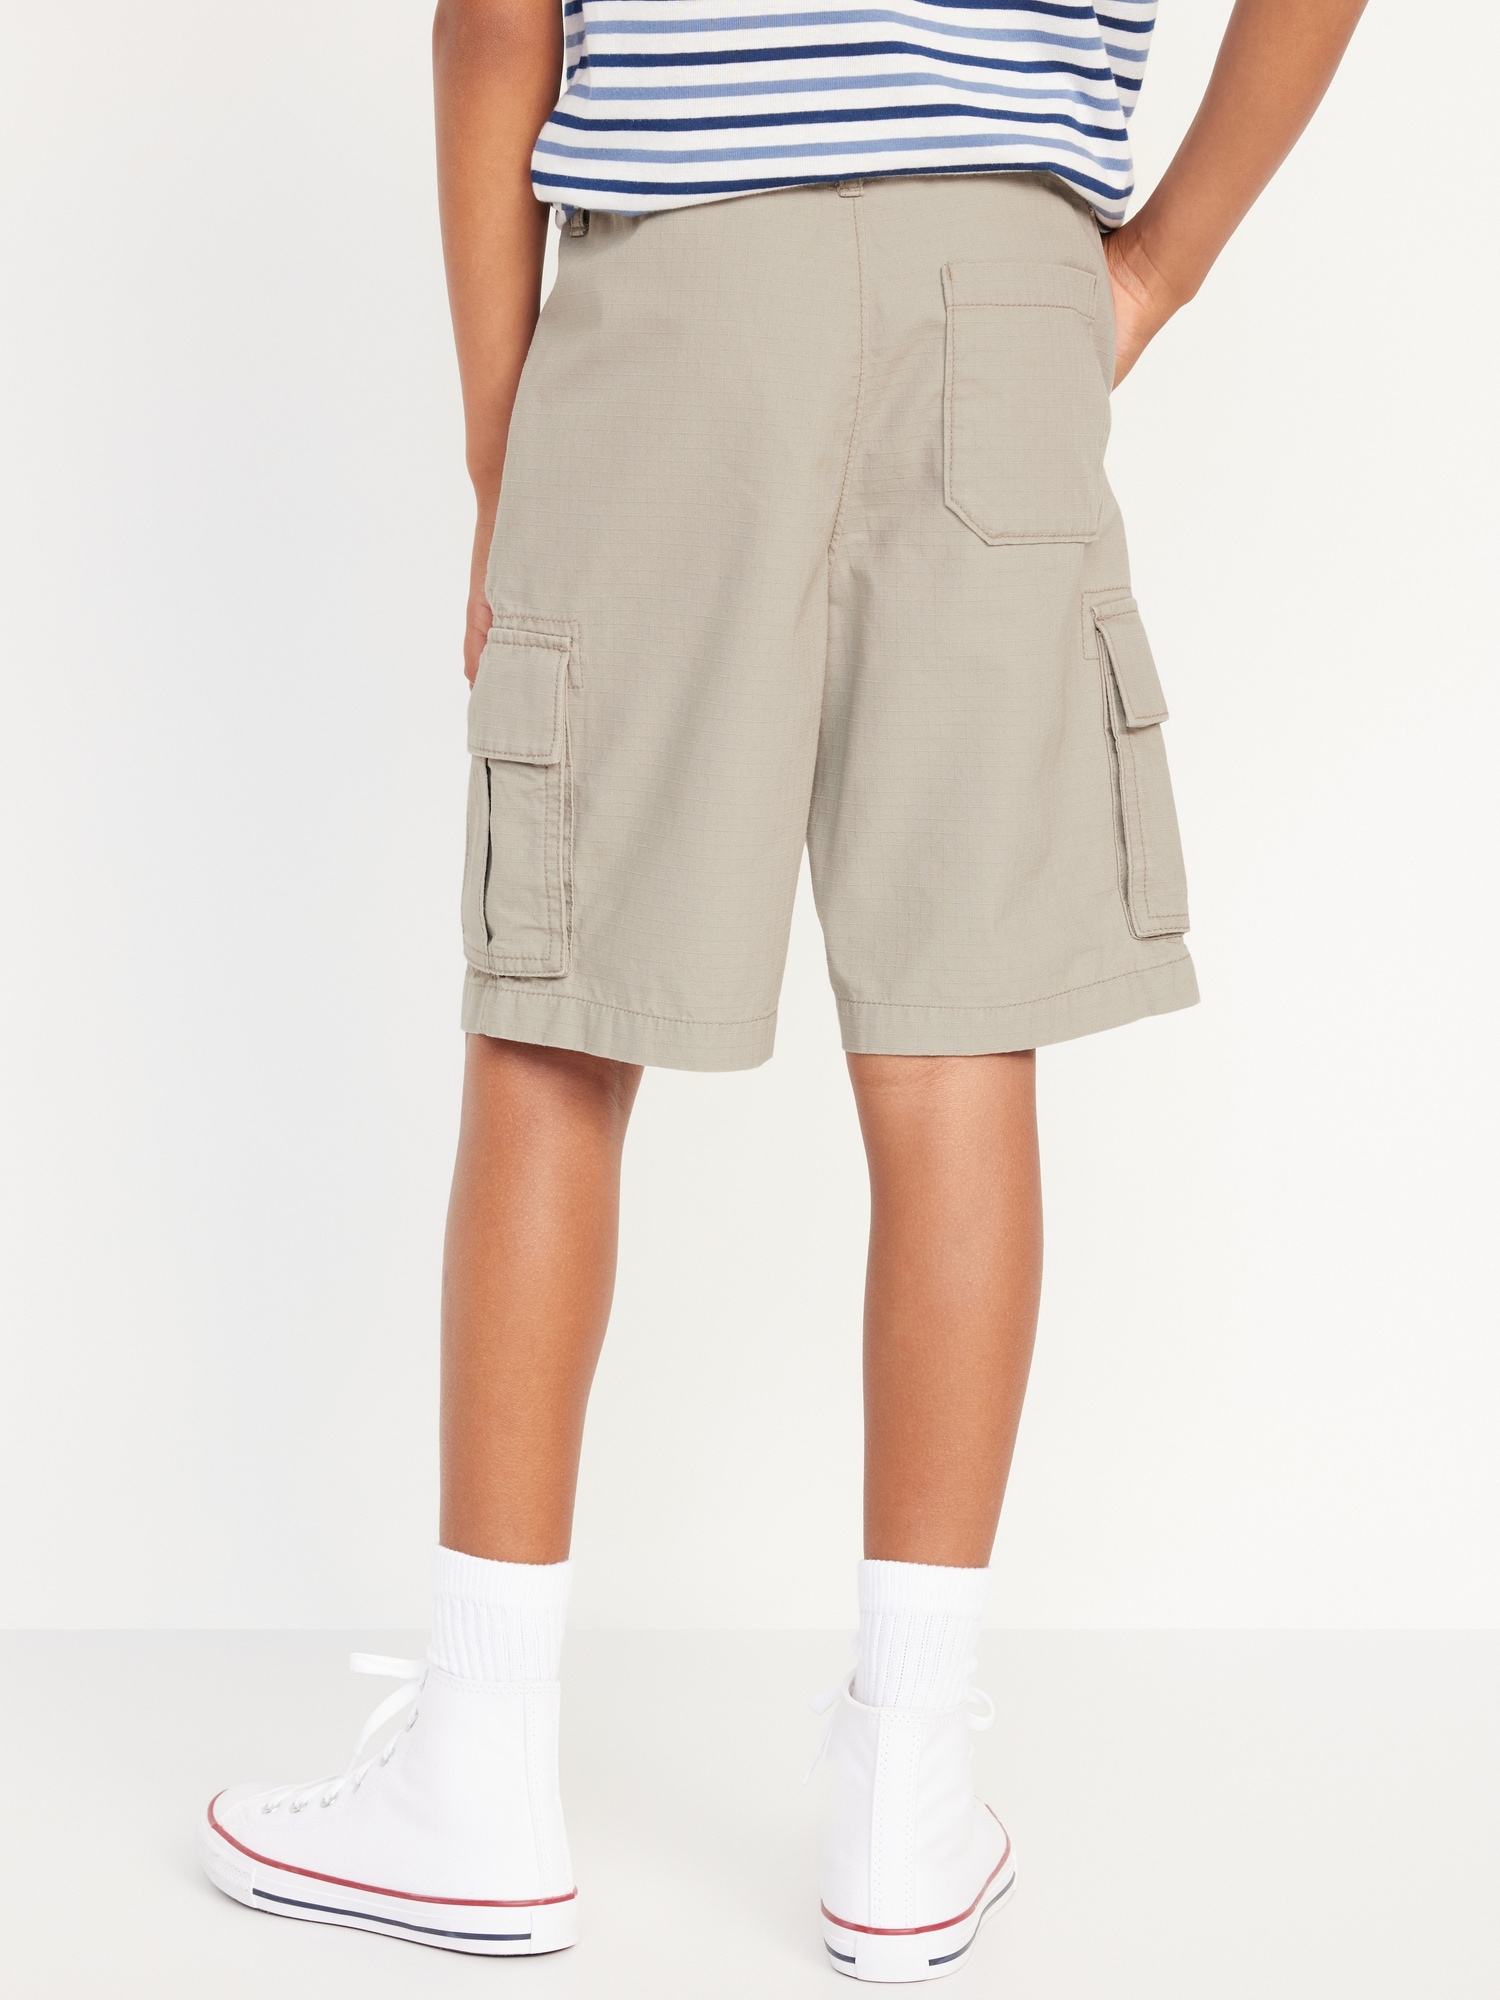 Loose Cargo Shorts for Boys (At Knee)